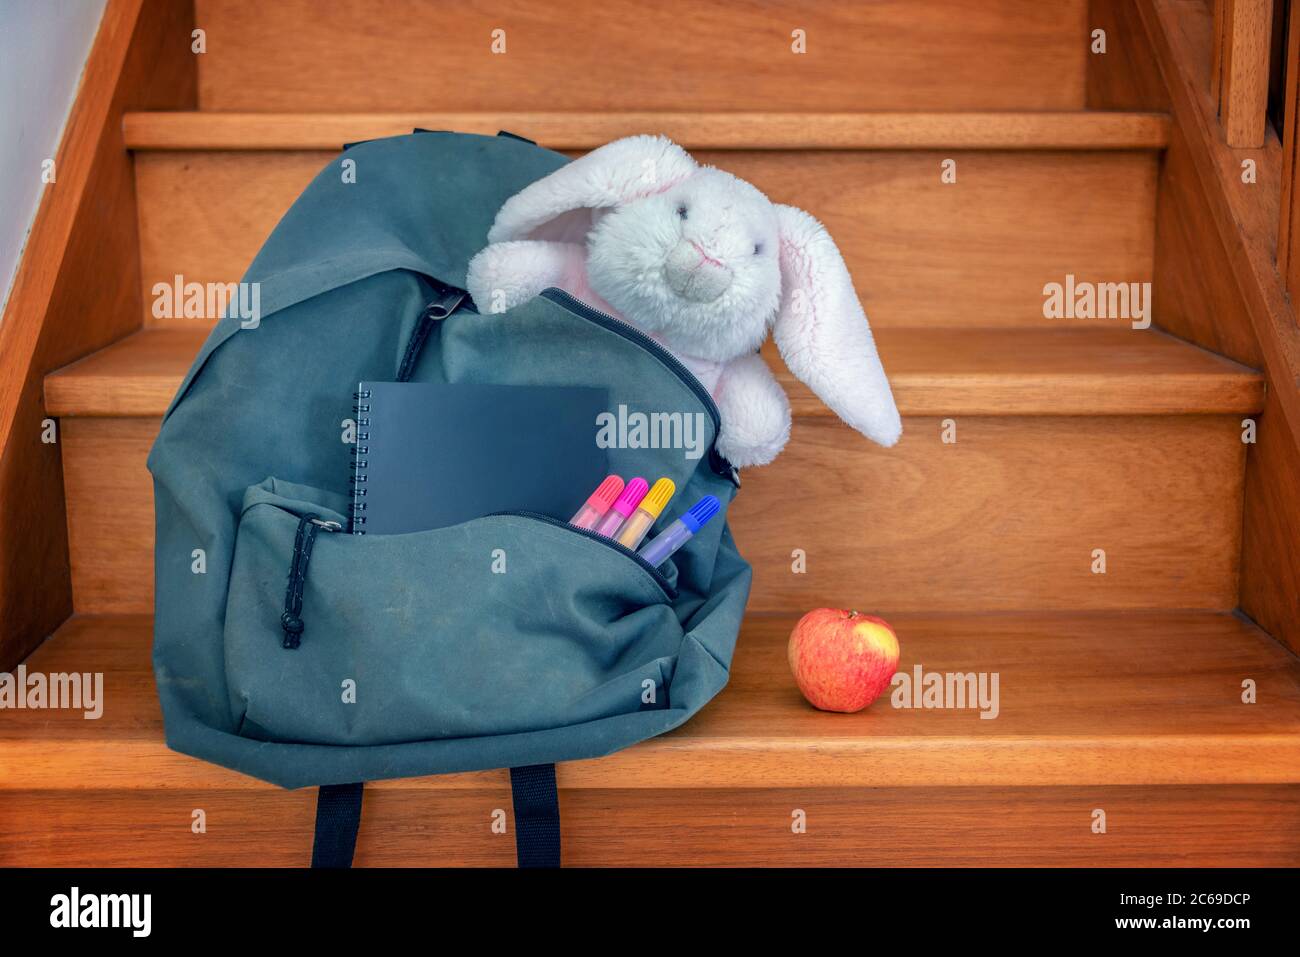 School bag with cuddly toy, supplies and lunch Stock Photo